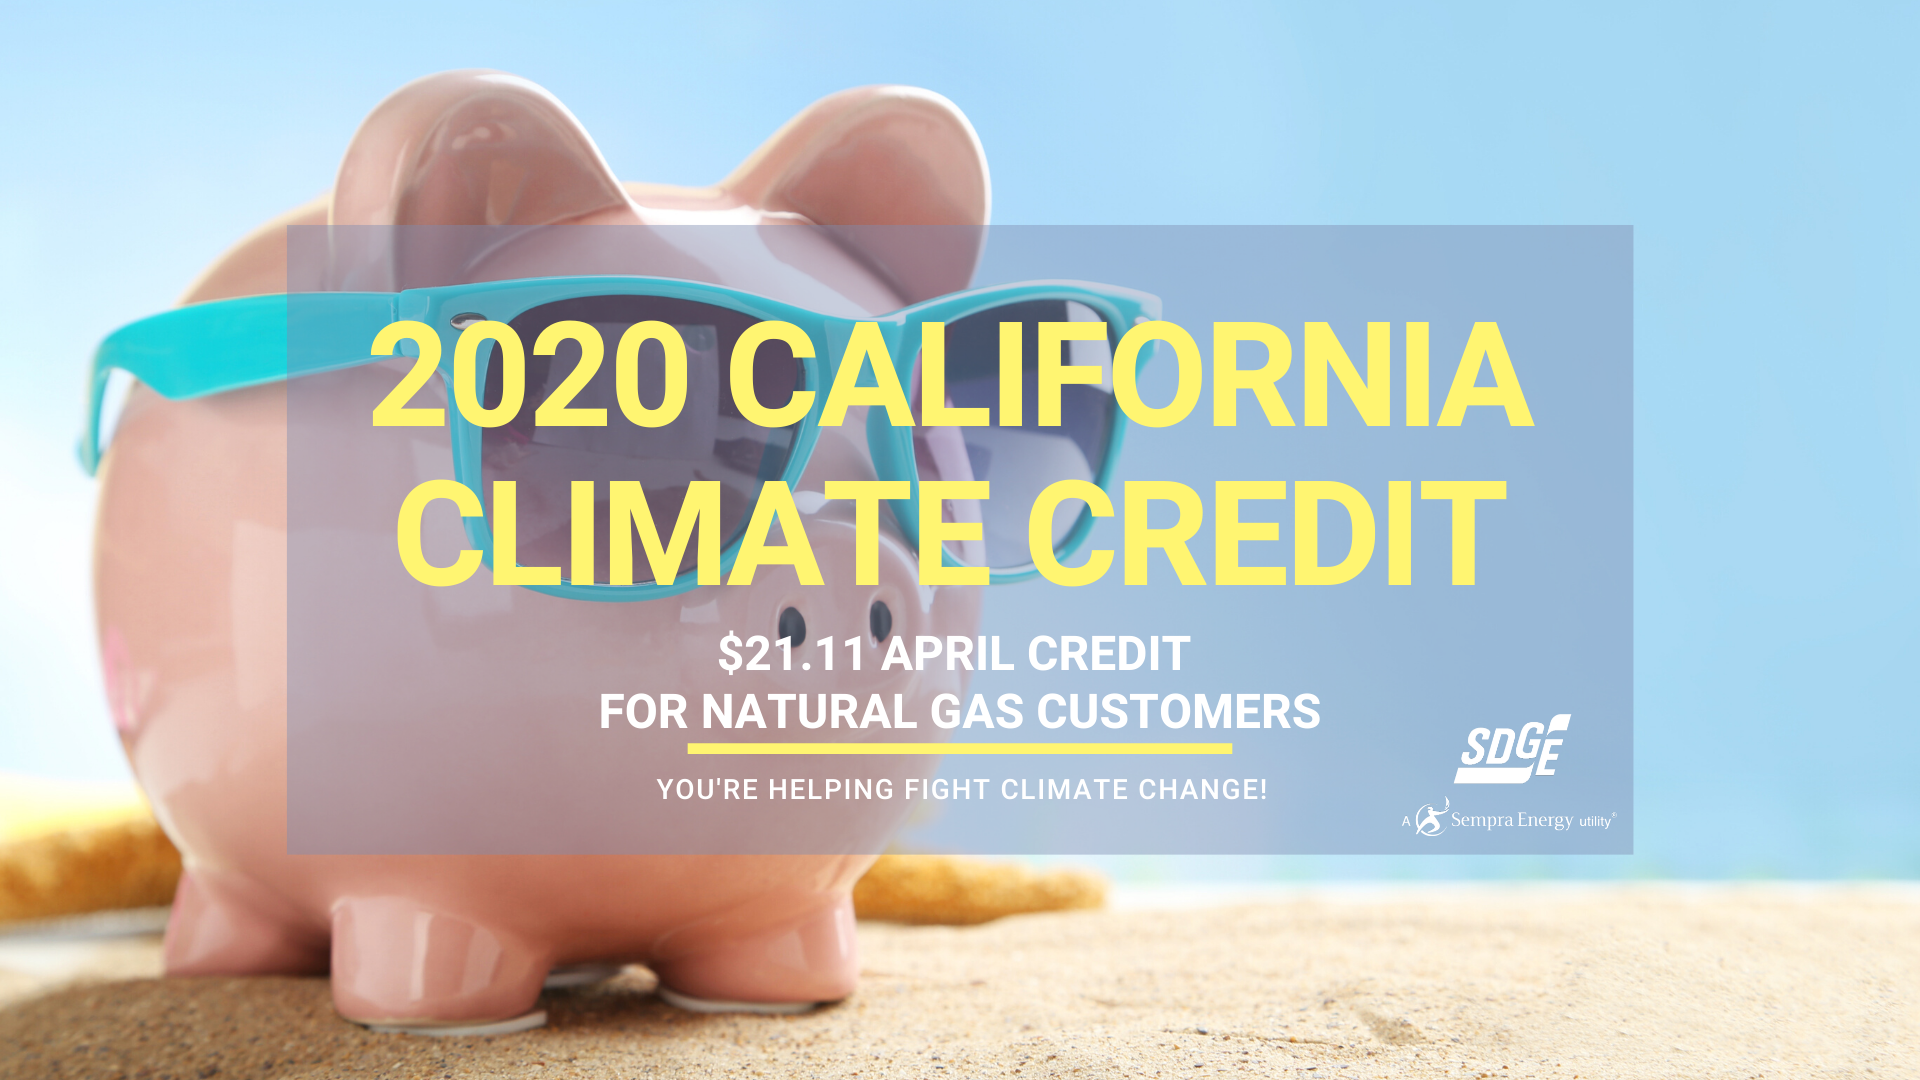 california-climate-credit-to-offset-april-bills-for-sdg-e-natural-gas